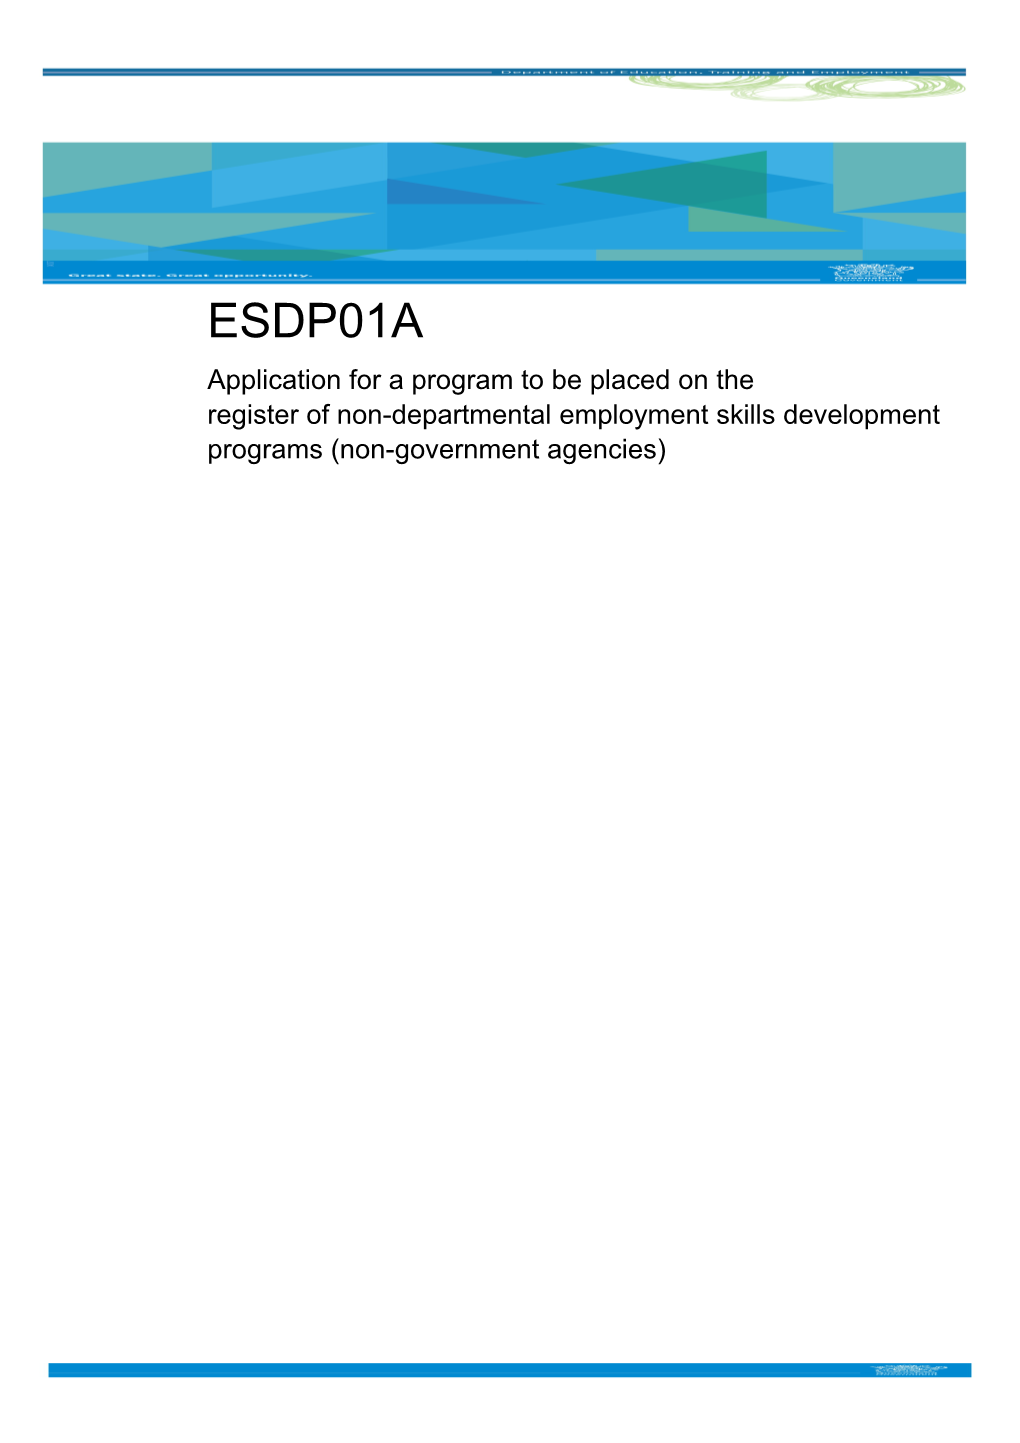 ESDP01A - Application for a Program to Be Placed on the Register of Non-Departmental Employment